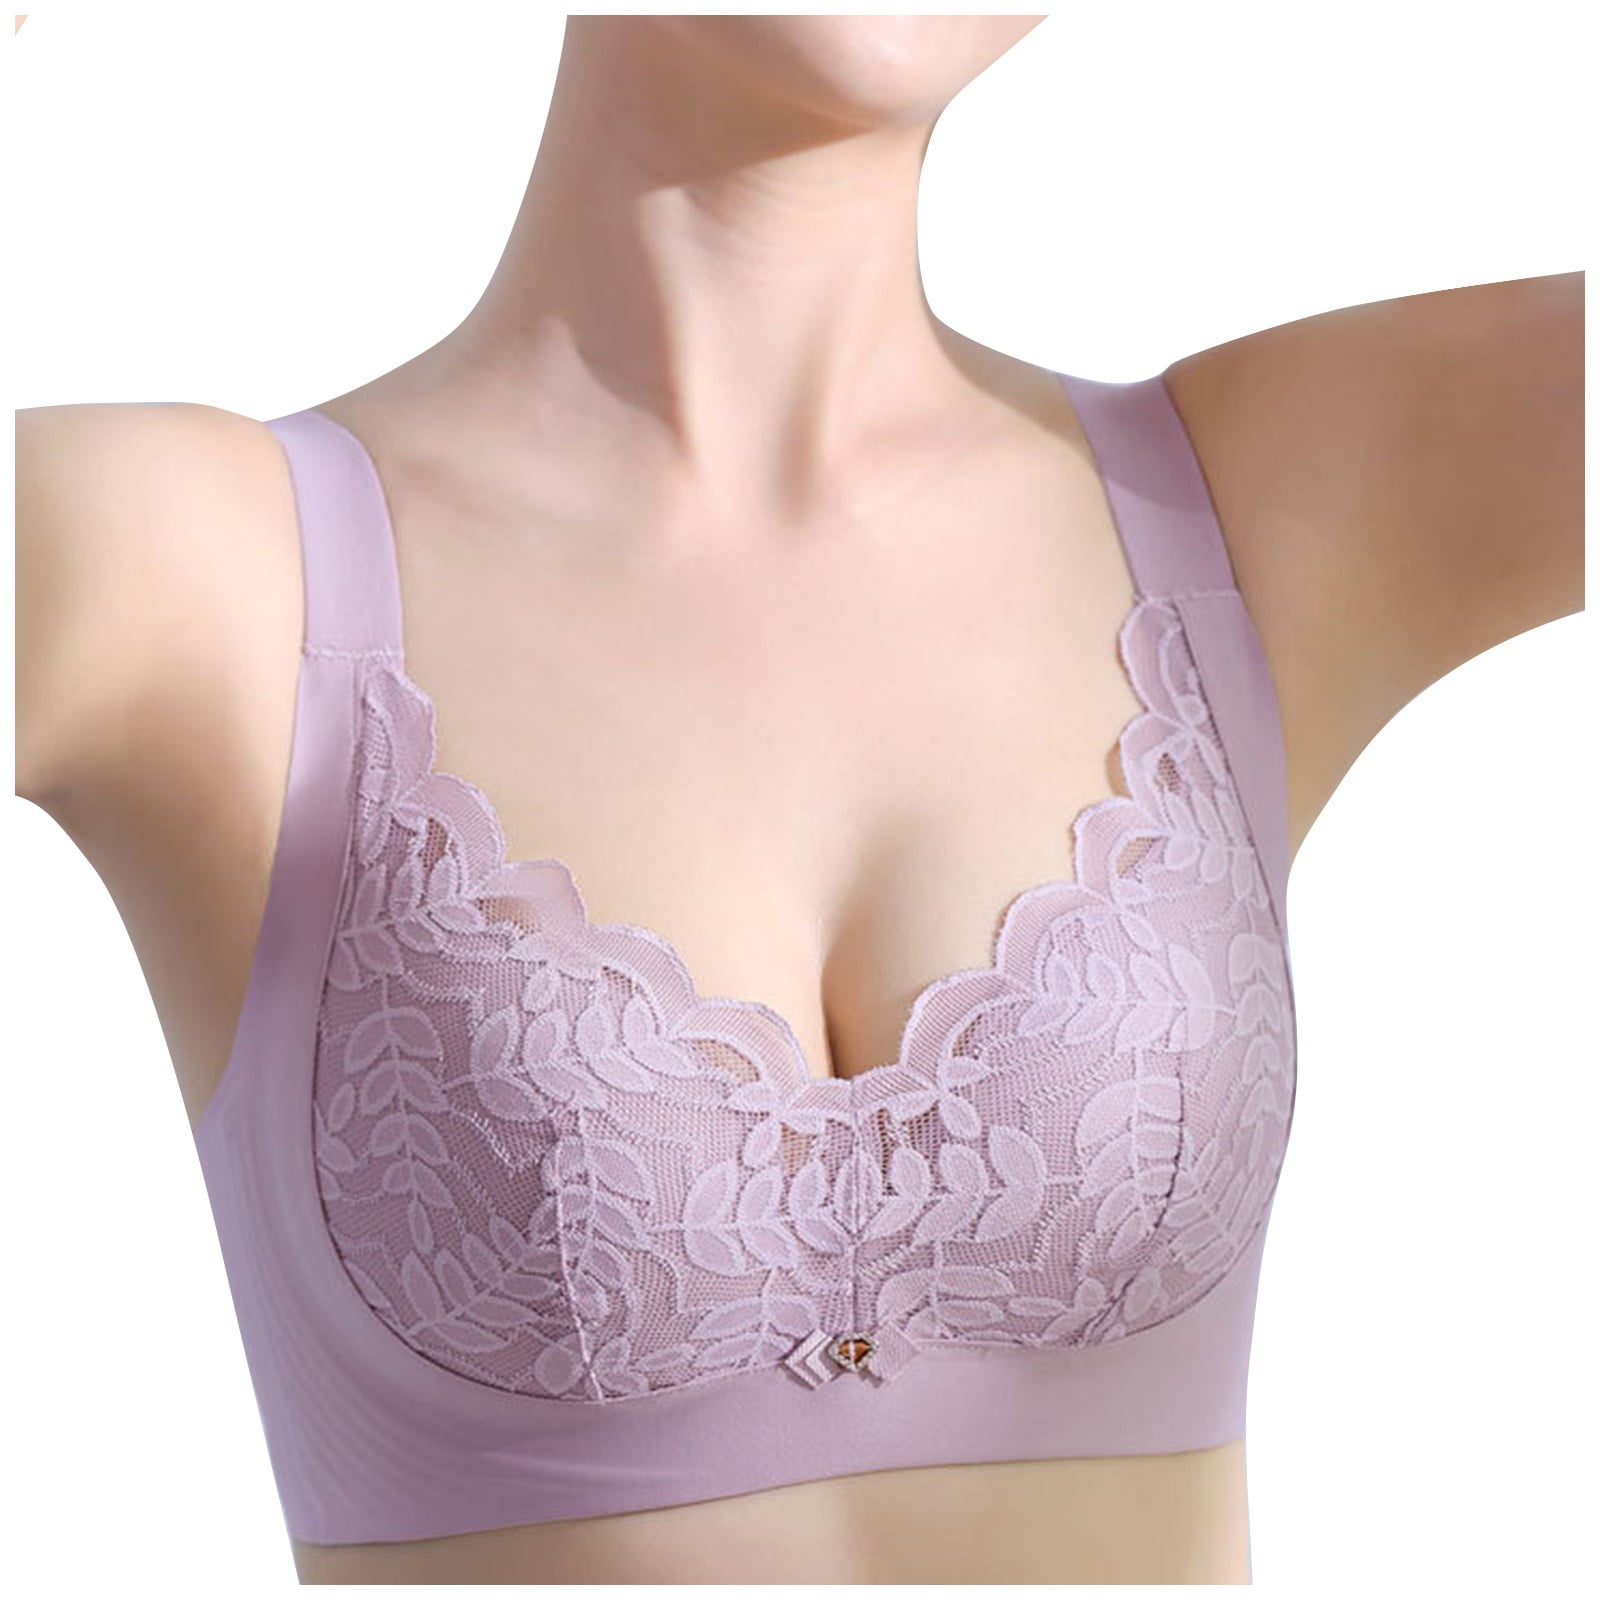 Knosfe Seamless Support Full-Coverage Wireless Bra for Women